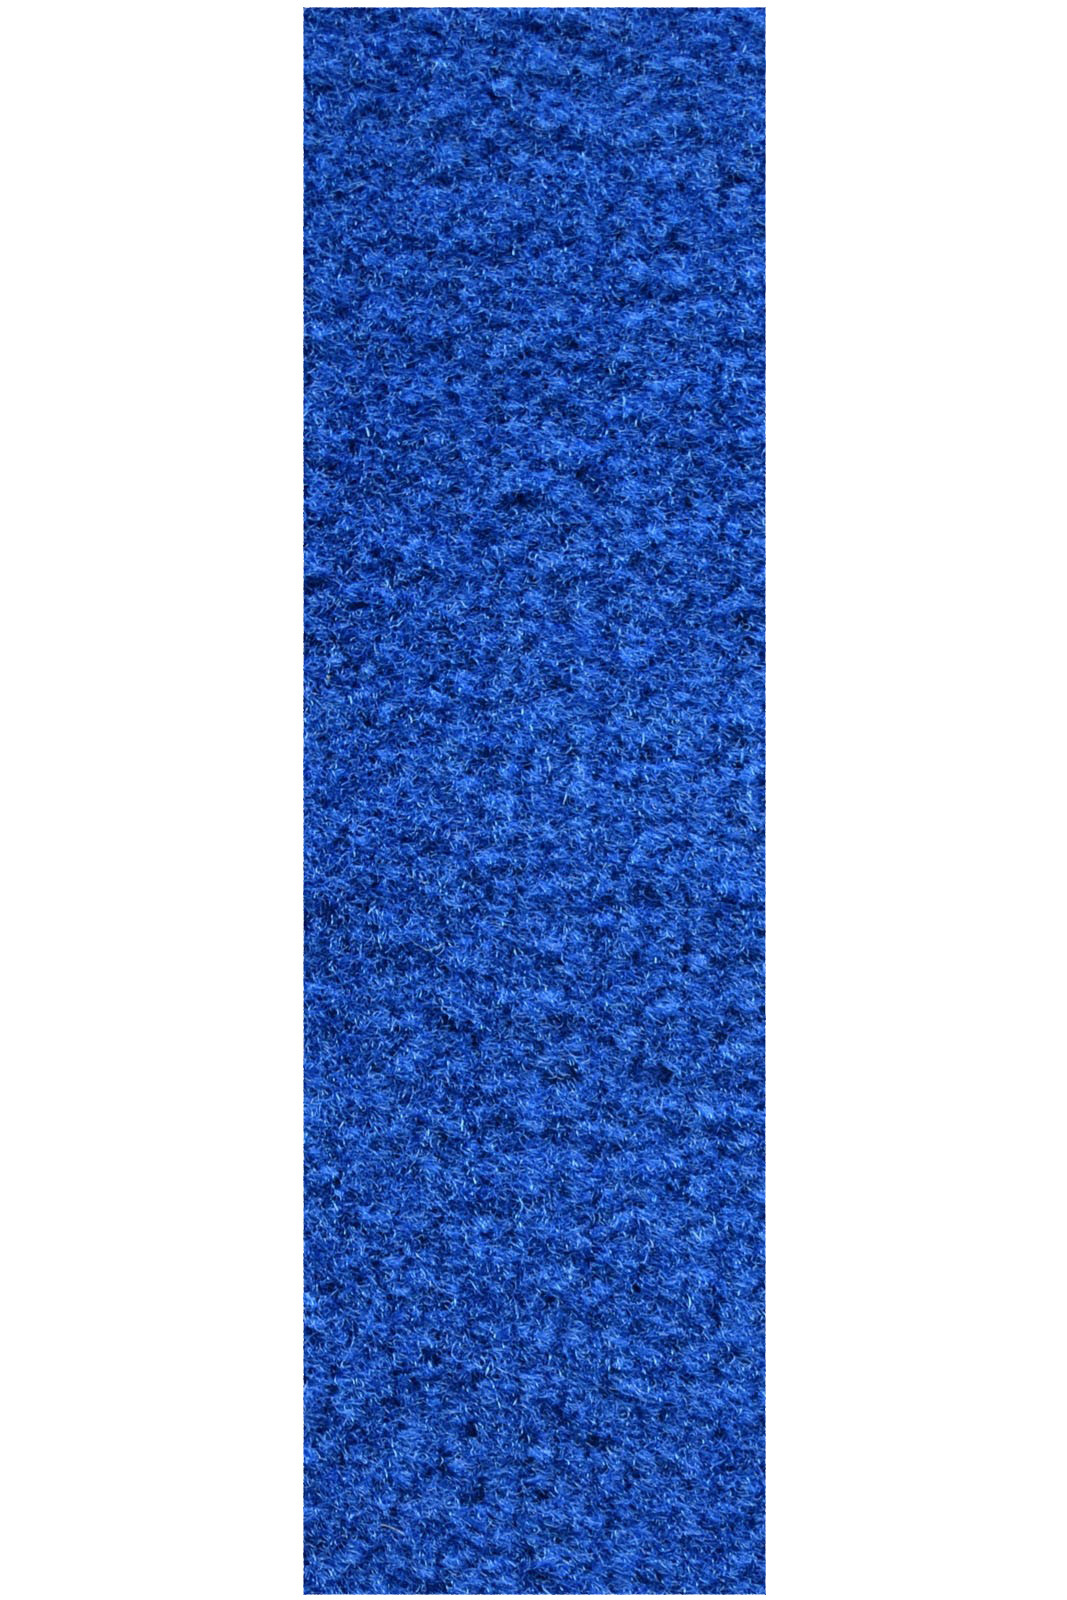 Commercial Indoor/Outdoor Blue Custom Size Runner 2' x 32' - Area Rug with Rubber Marine Backing for Patio, Porch, Deck, Boat, Basement or Garage with Premium Bound Polyester Edges - image 1 of 1